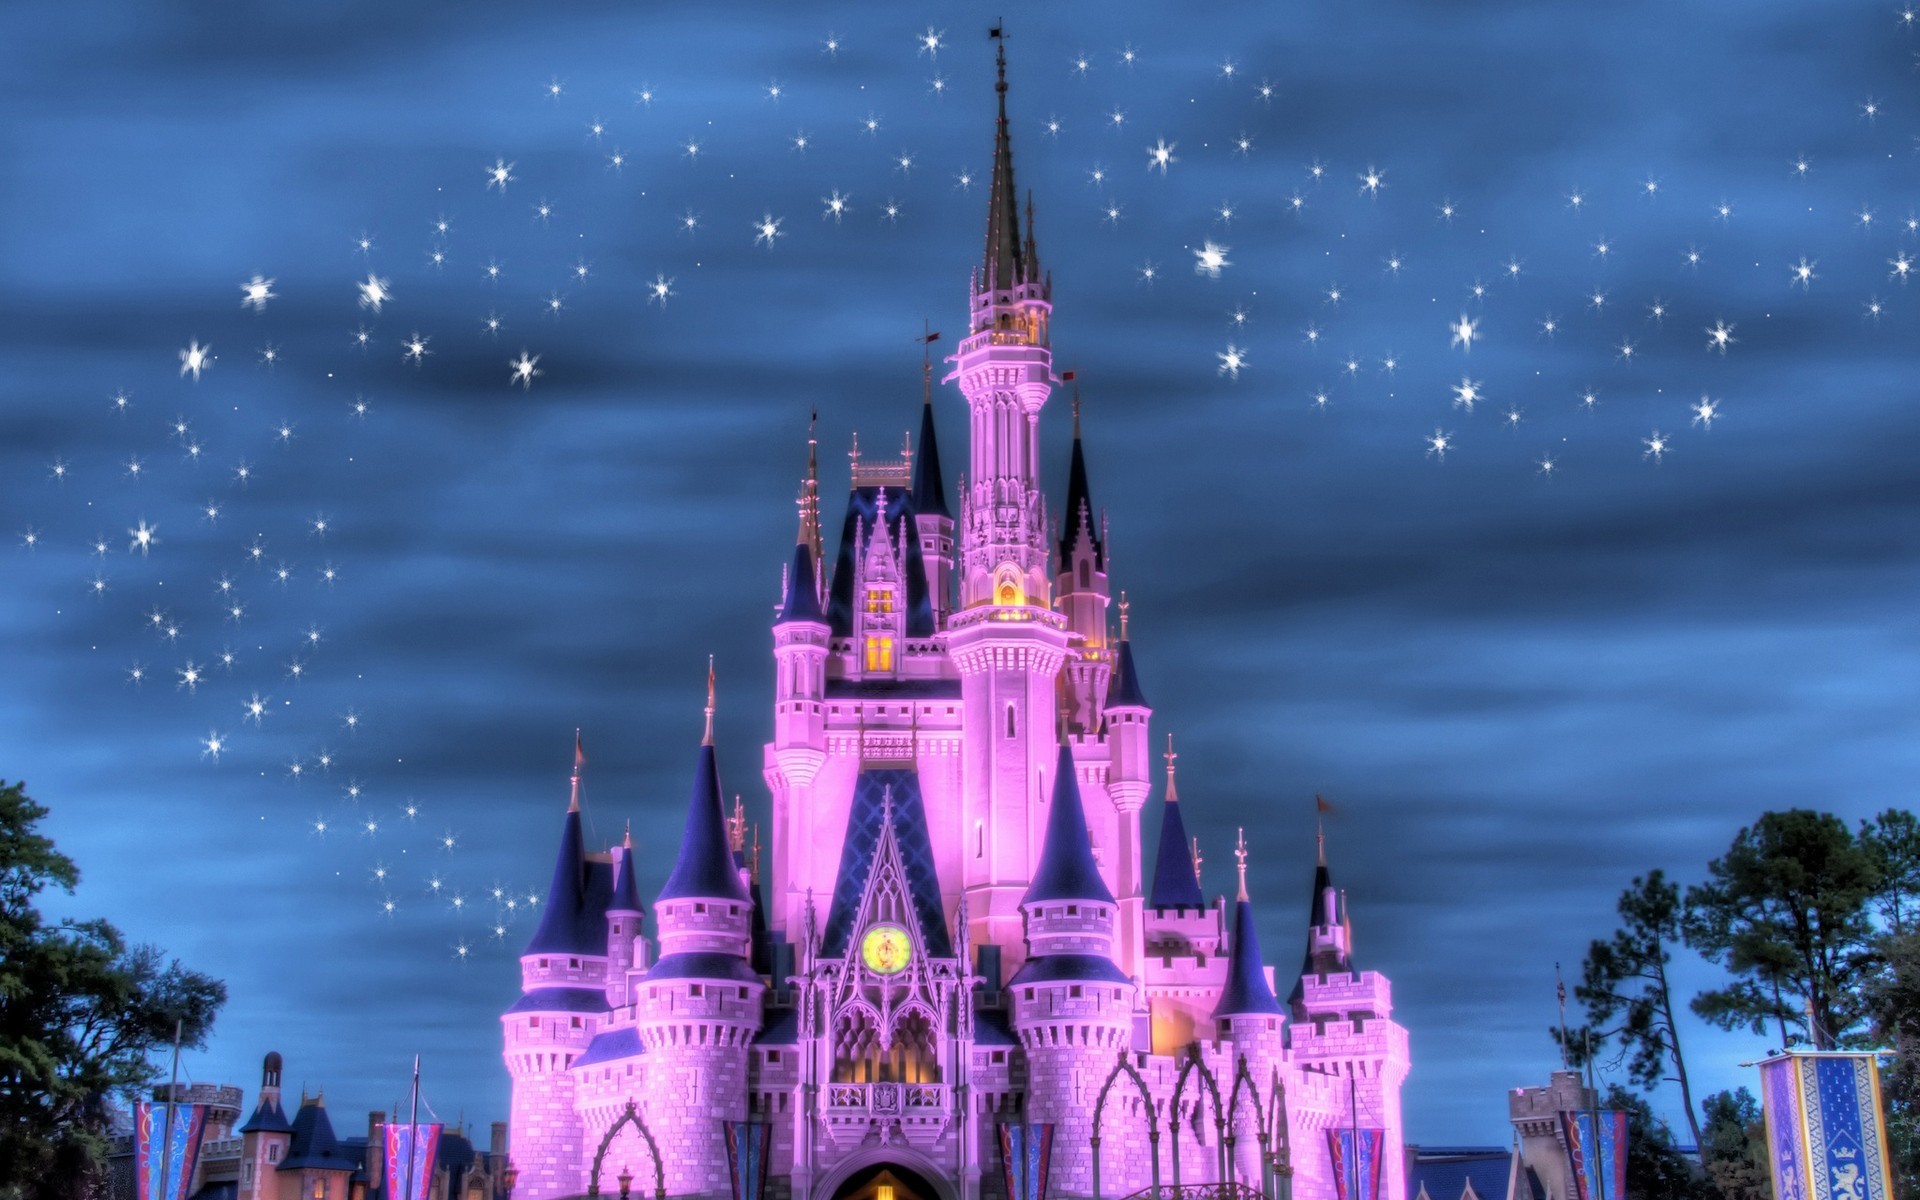 Disney Castle Background the best 65 images in 2018